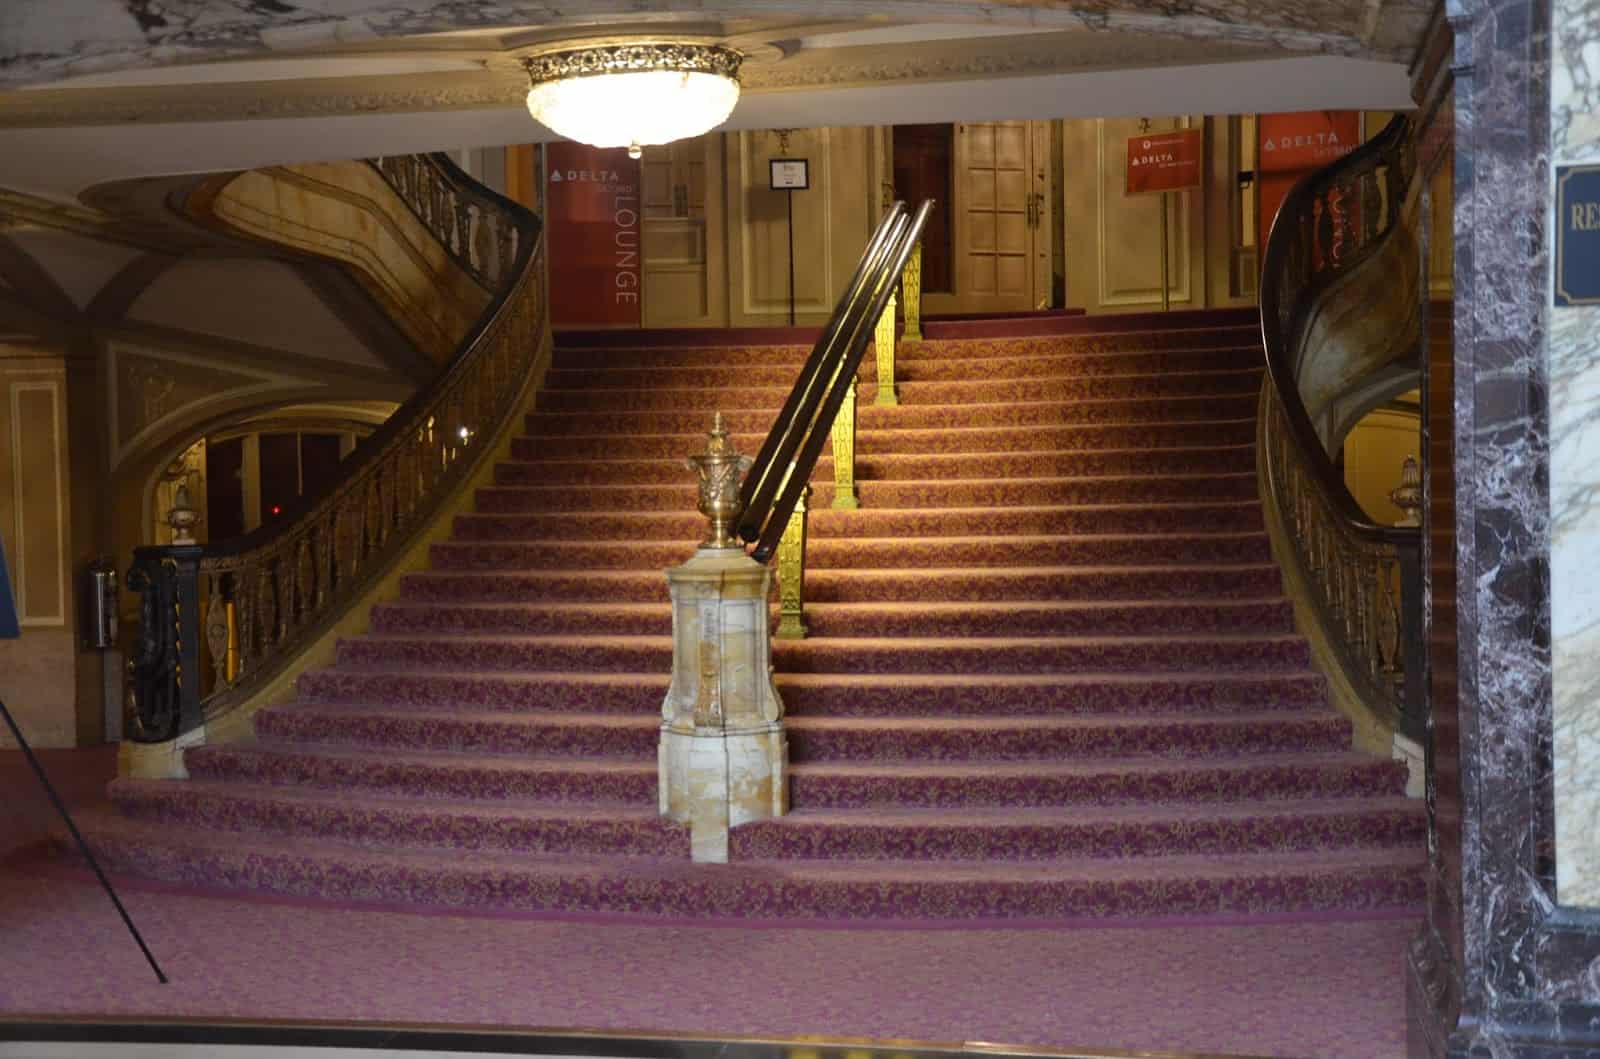 Staircase of the Chicago Theatre on State Street